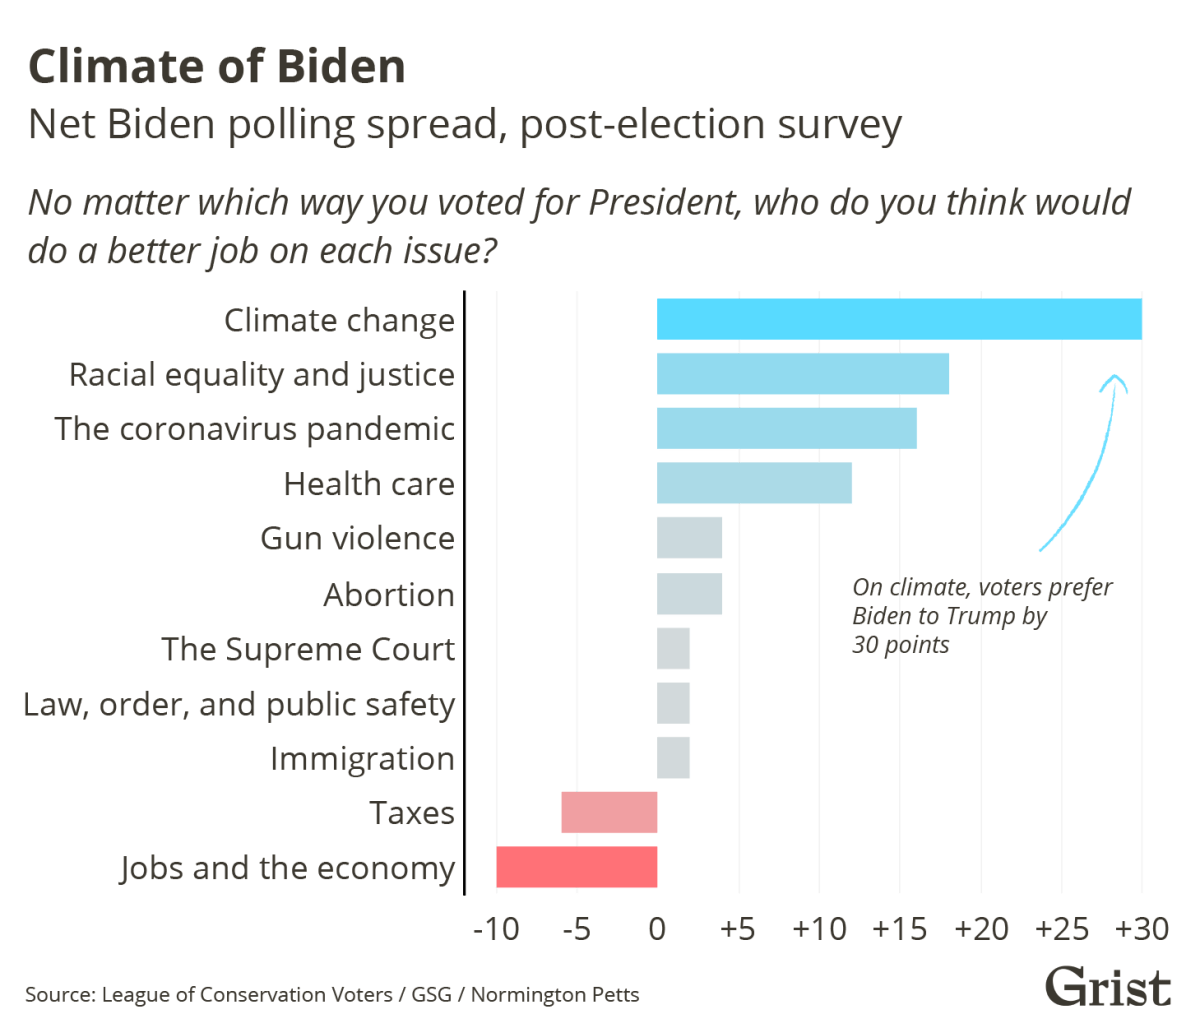 A bar chart showing results of a post-election survey on trust in the respective U.S. presidential candidates. Voters preferred Biden over Trump on climate change by 30 points.